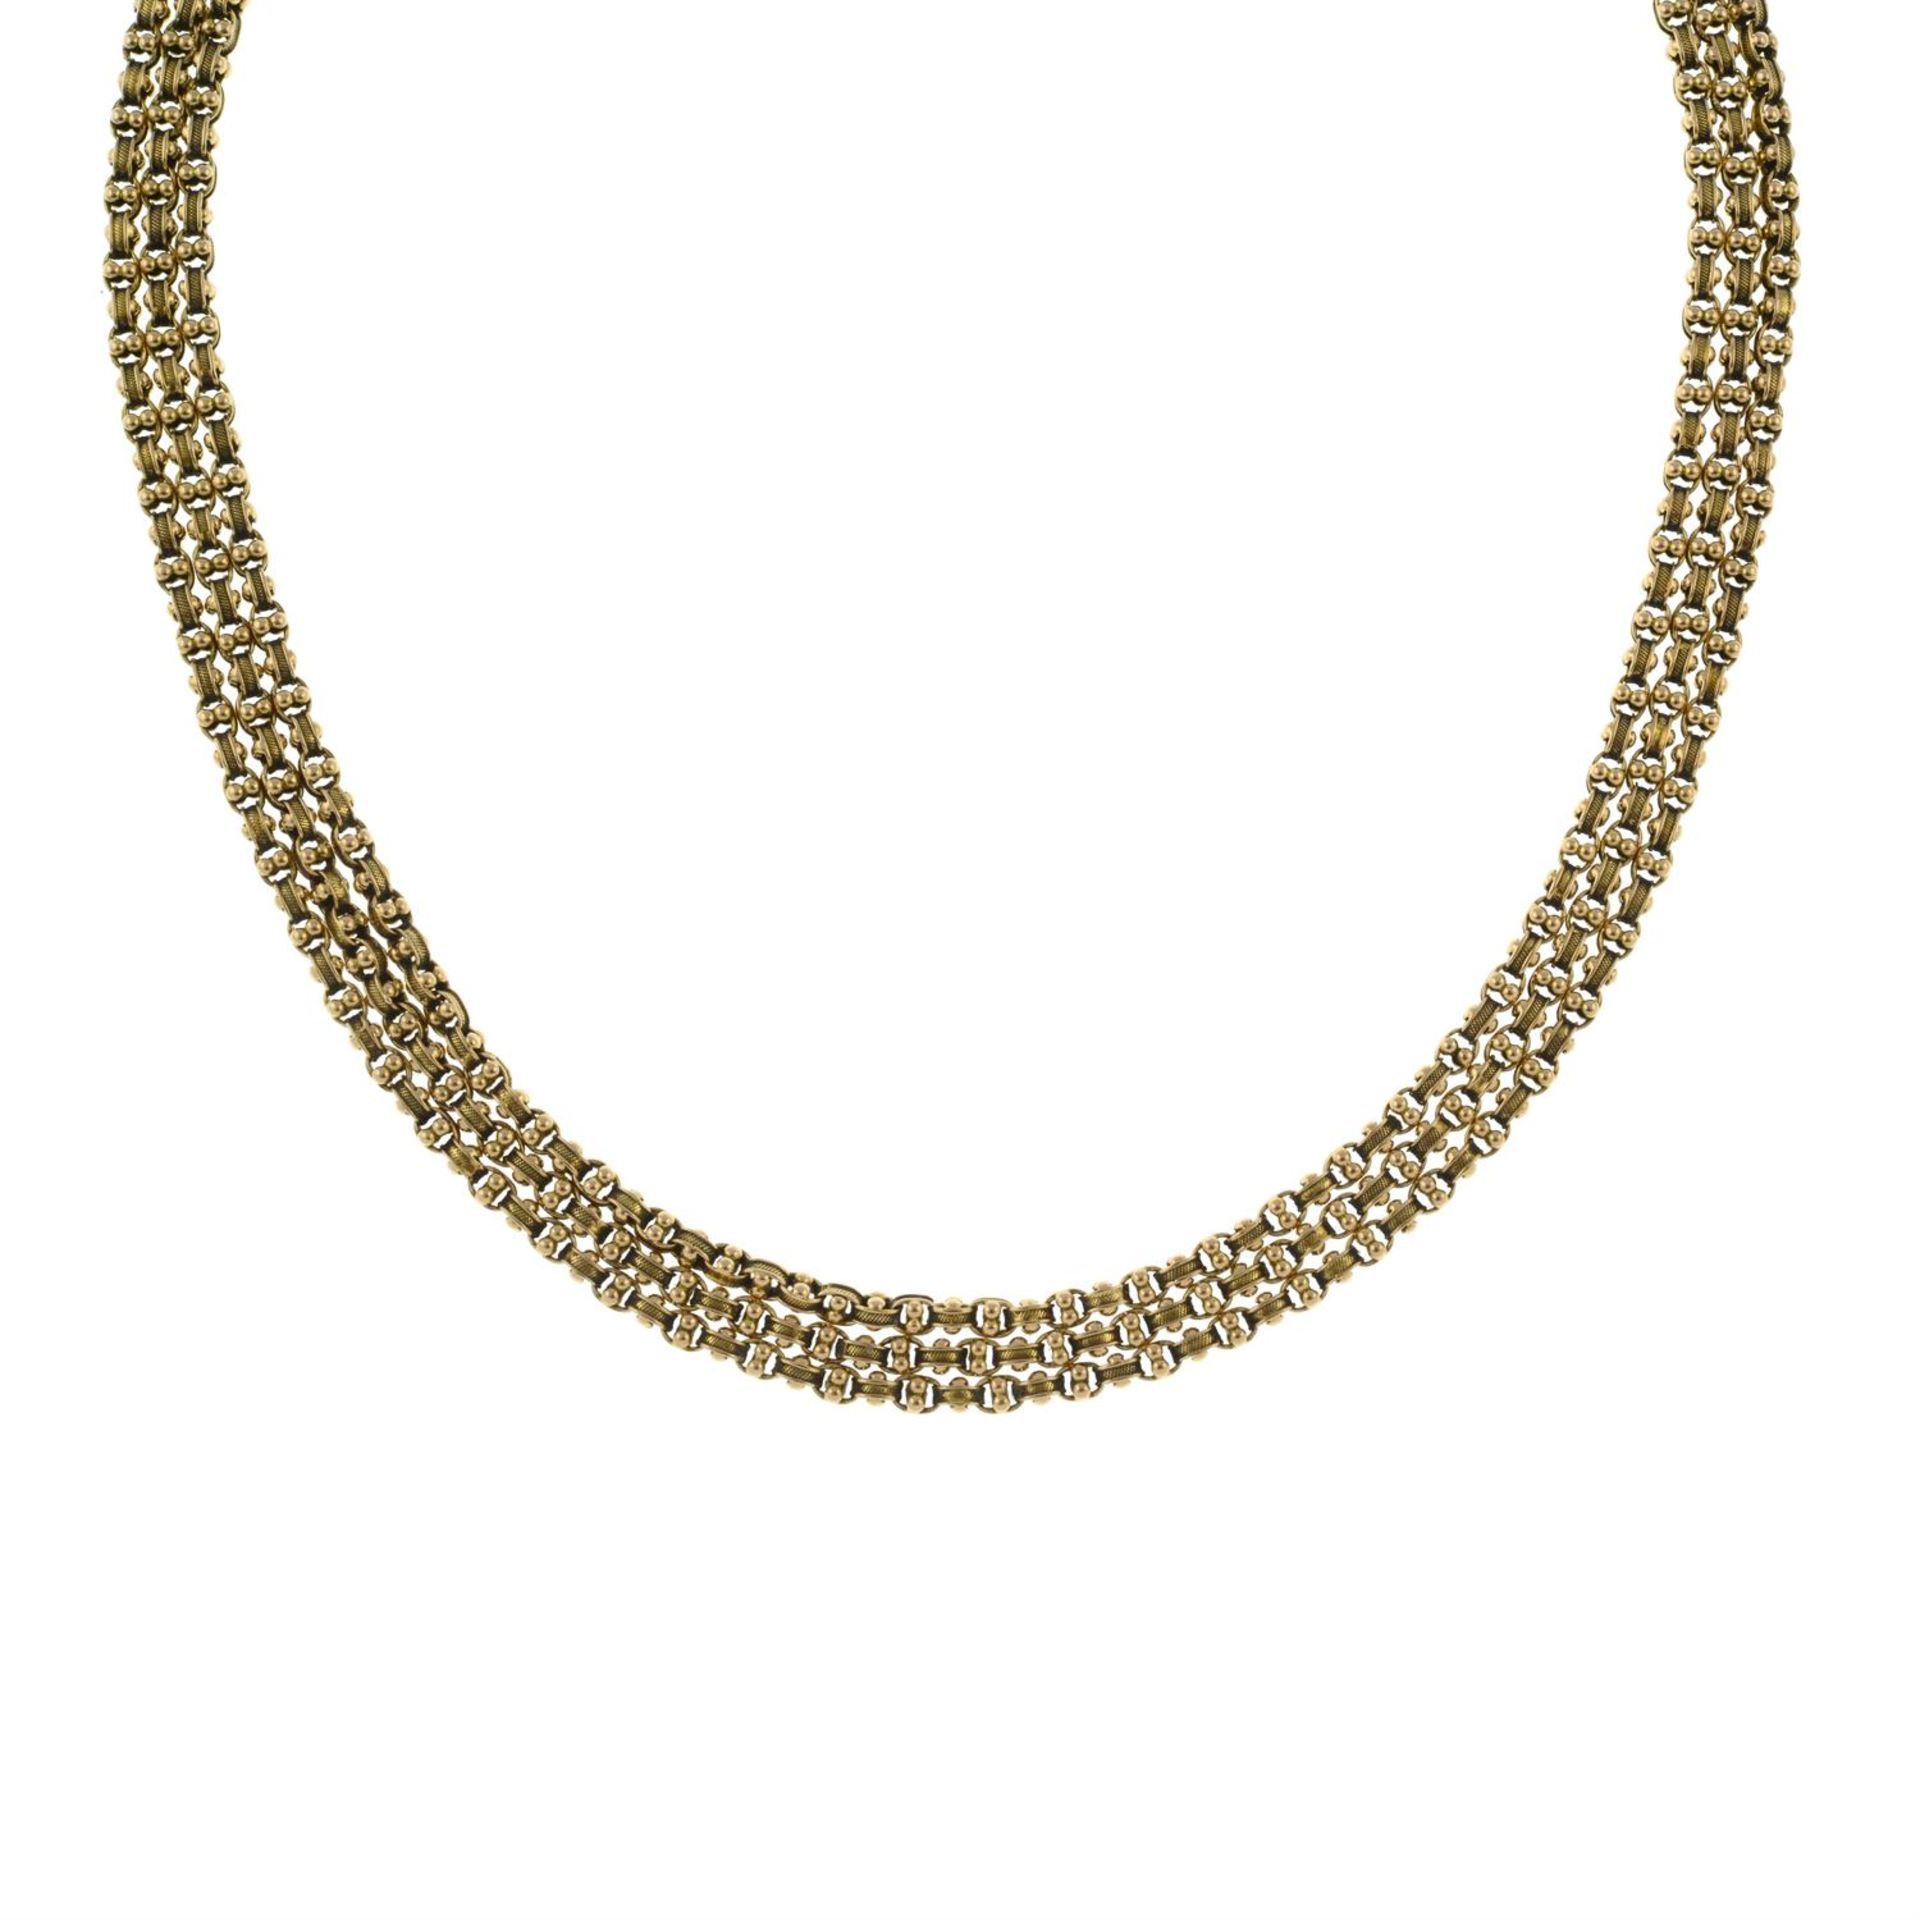 A Victorian three-row fancy-link necklace.